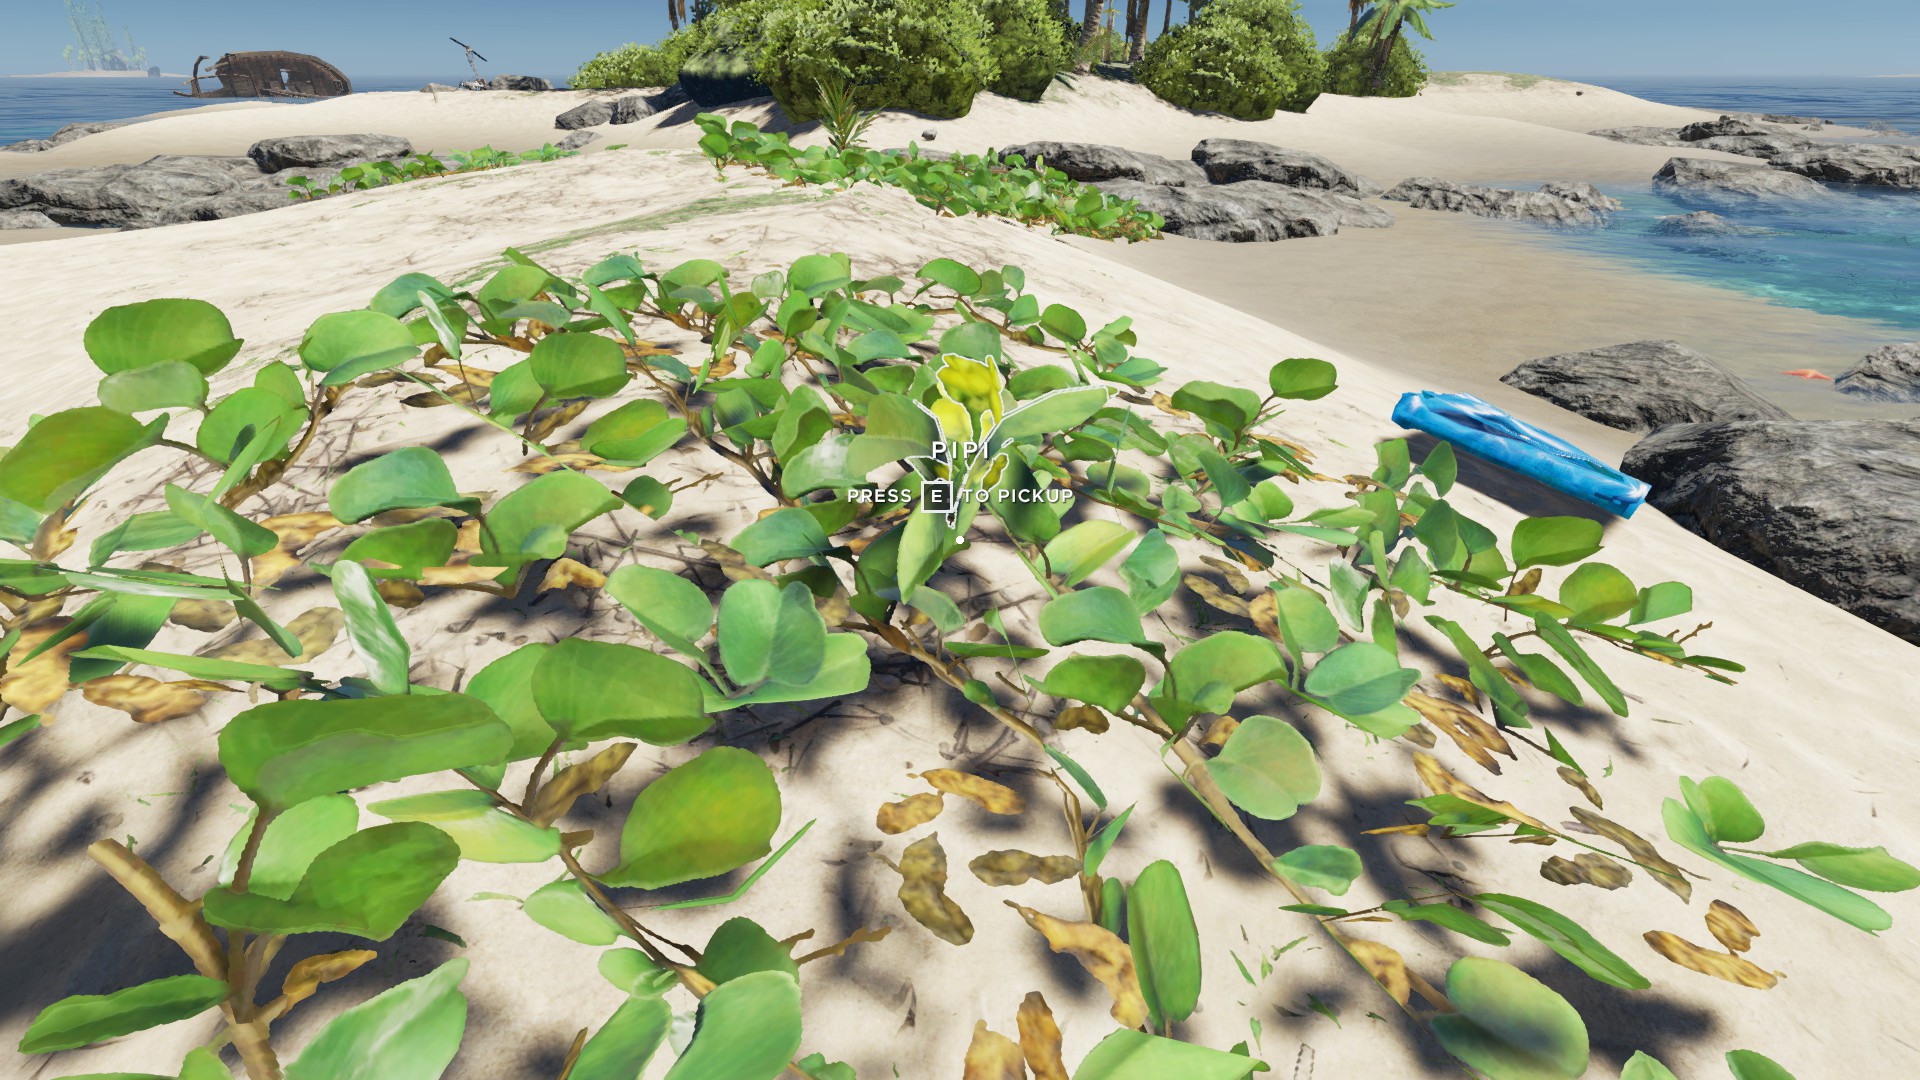 Stranded Deep: How To Get Clay